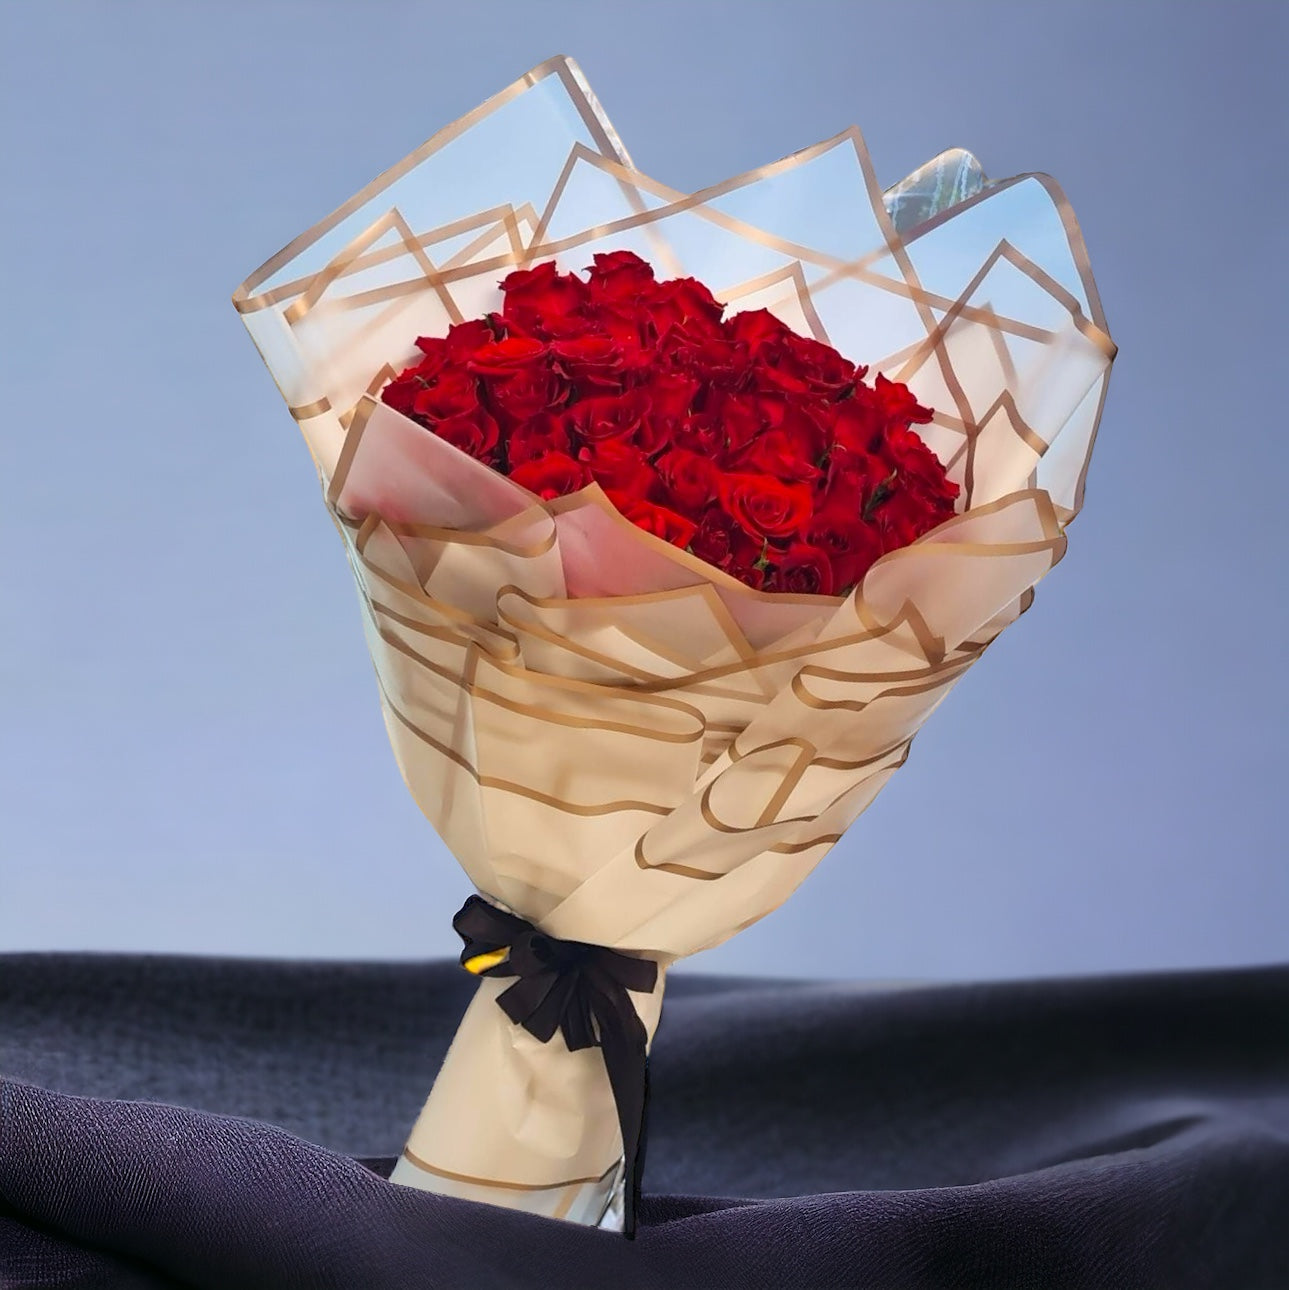 Special offer on Roses